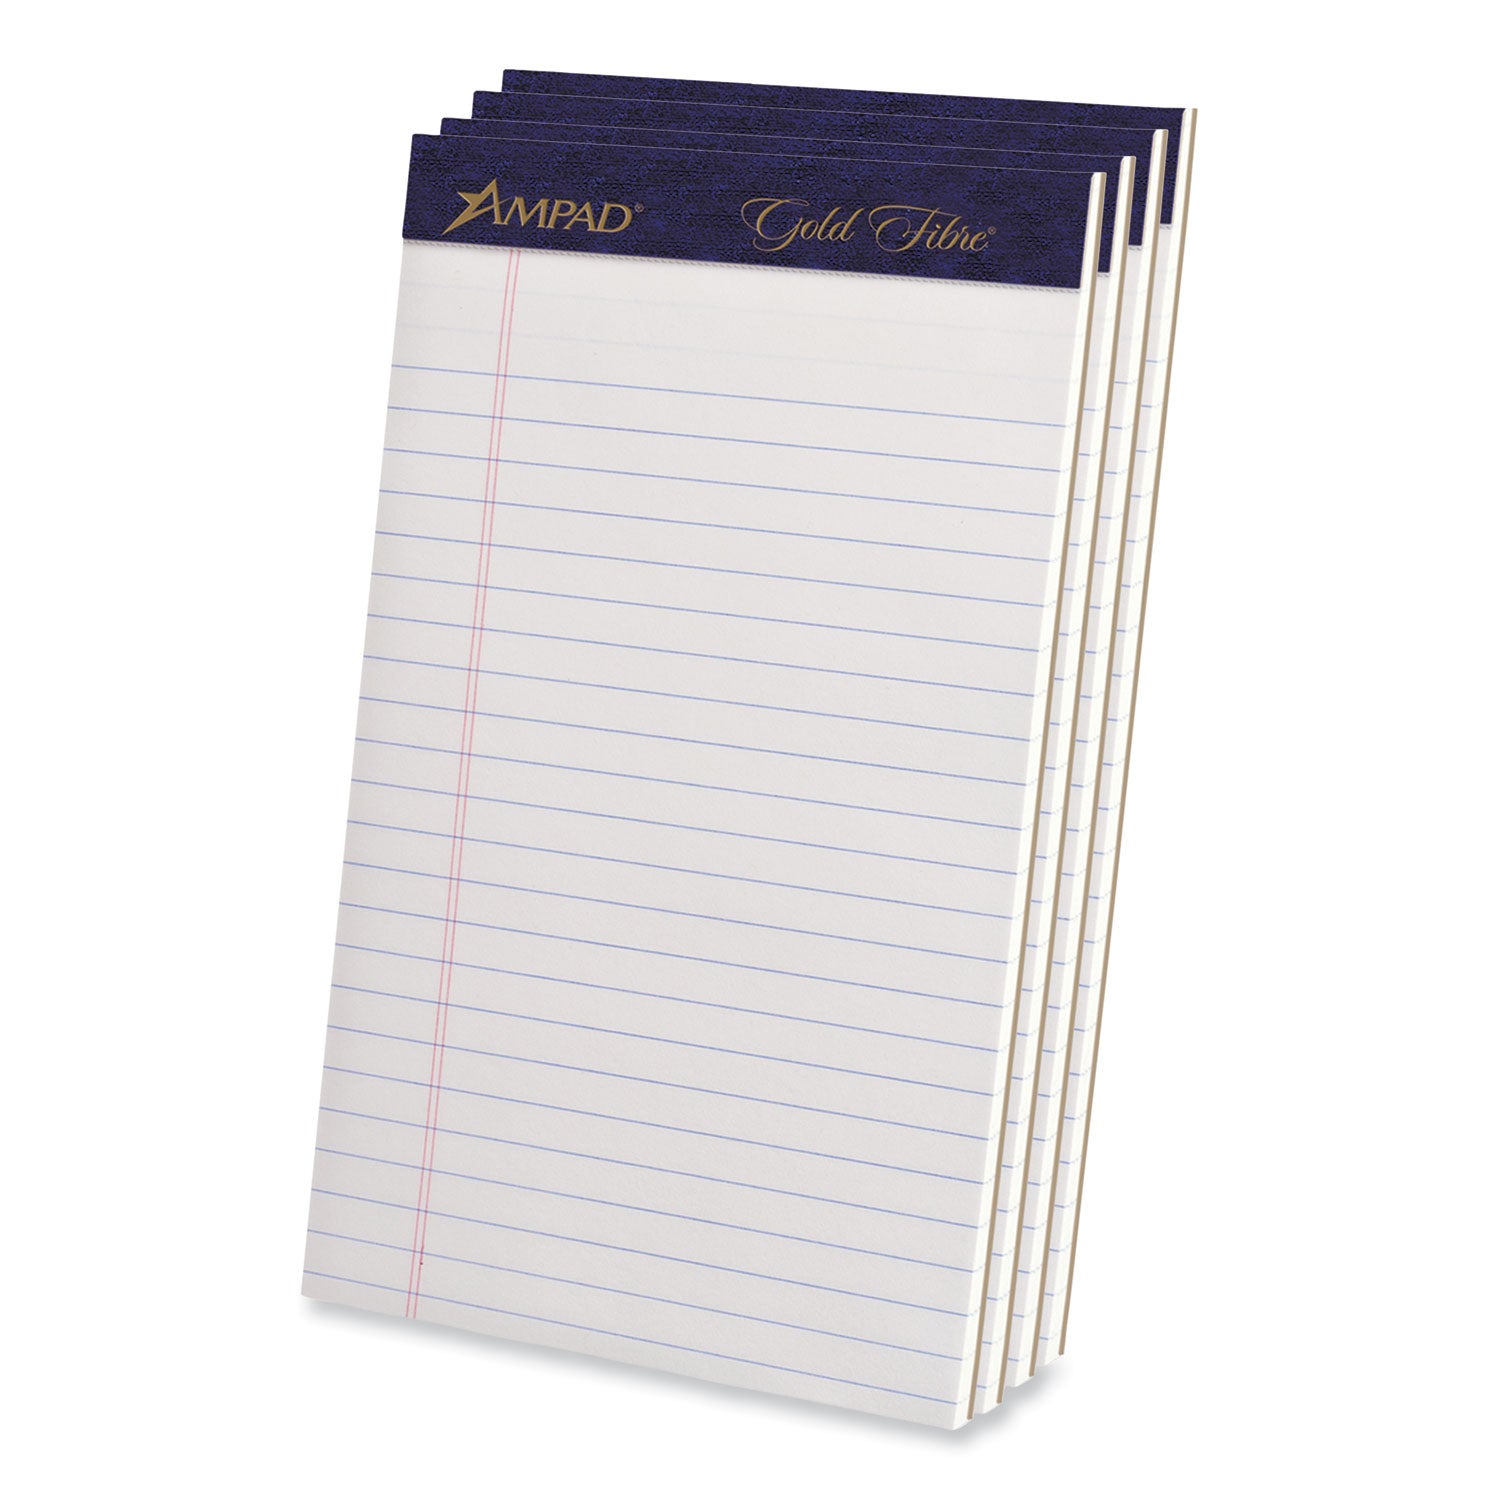 Gold Fibre Writing Pads, Narrow Rule, 50 White 5 x 8 Sheets, 4/Pack - 